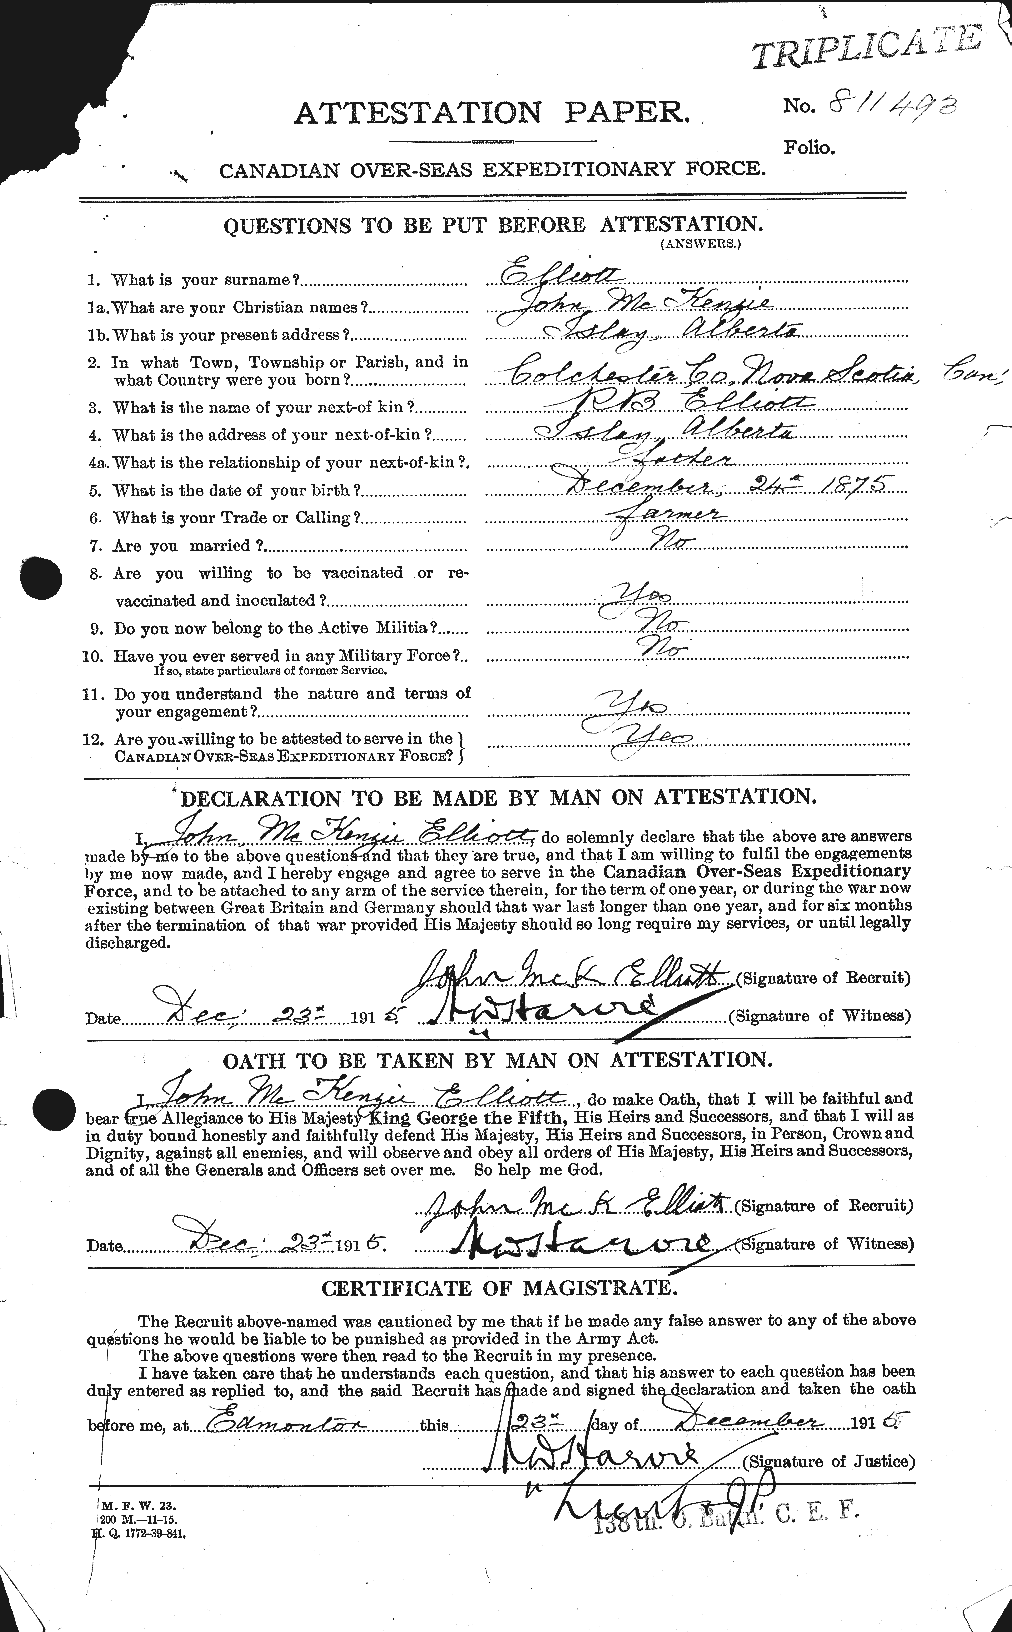 Personnel Records of the First World War - CEF 315364a